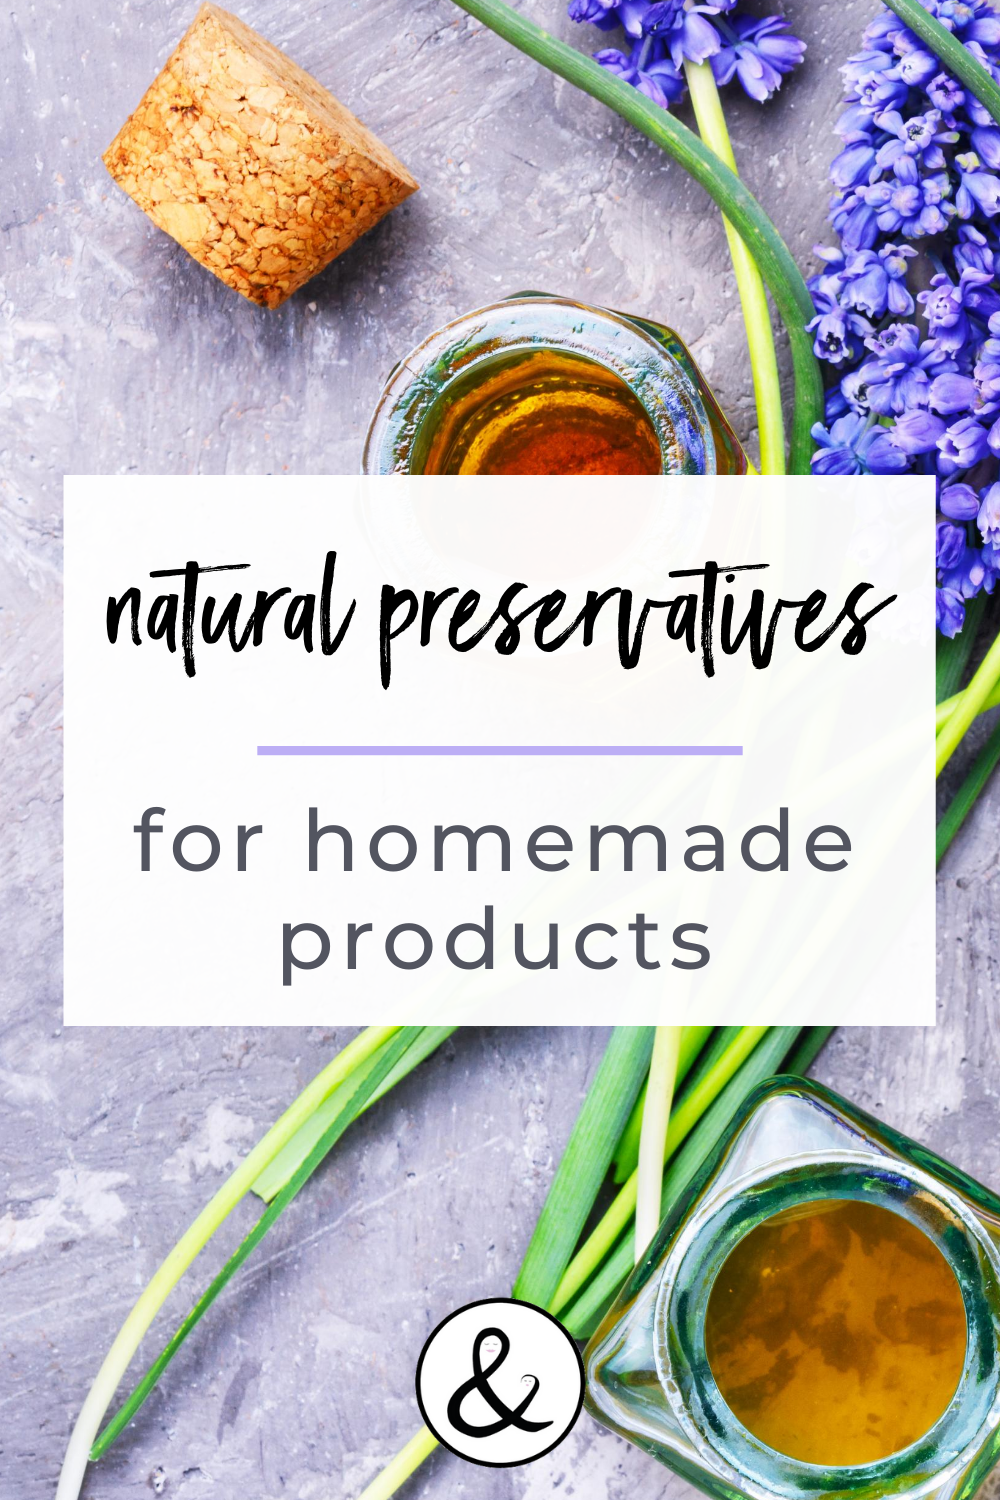 Natural Preservatives for Homemade Products